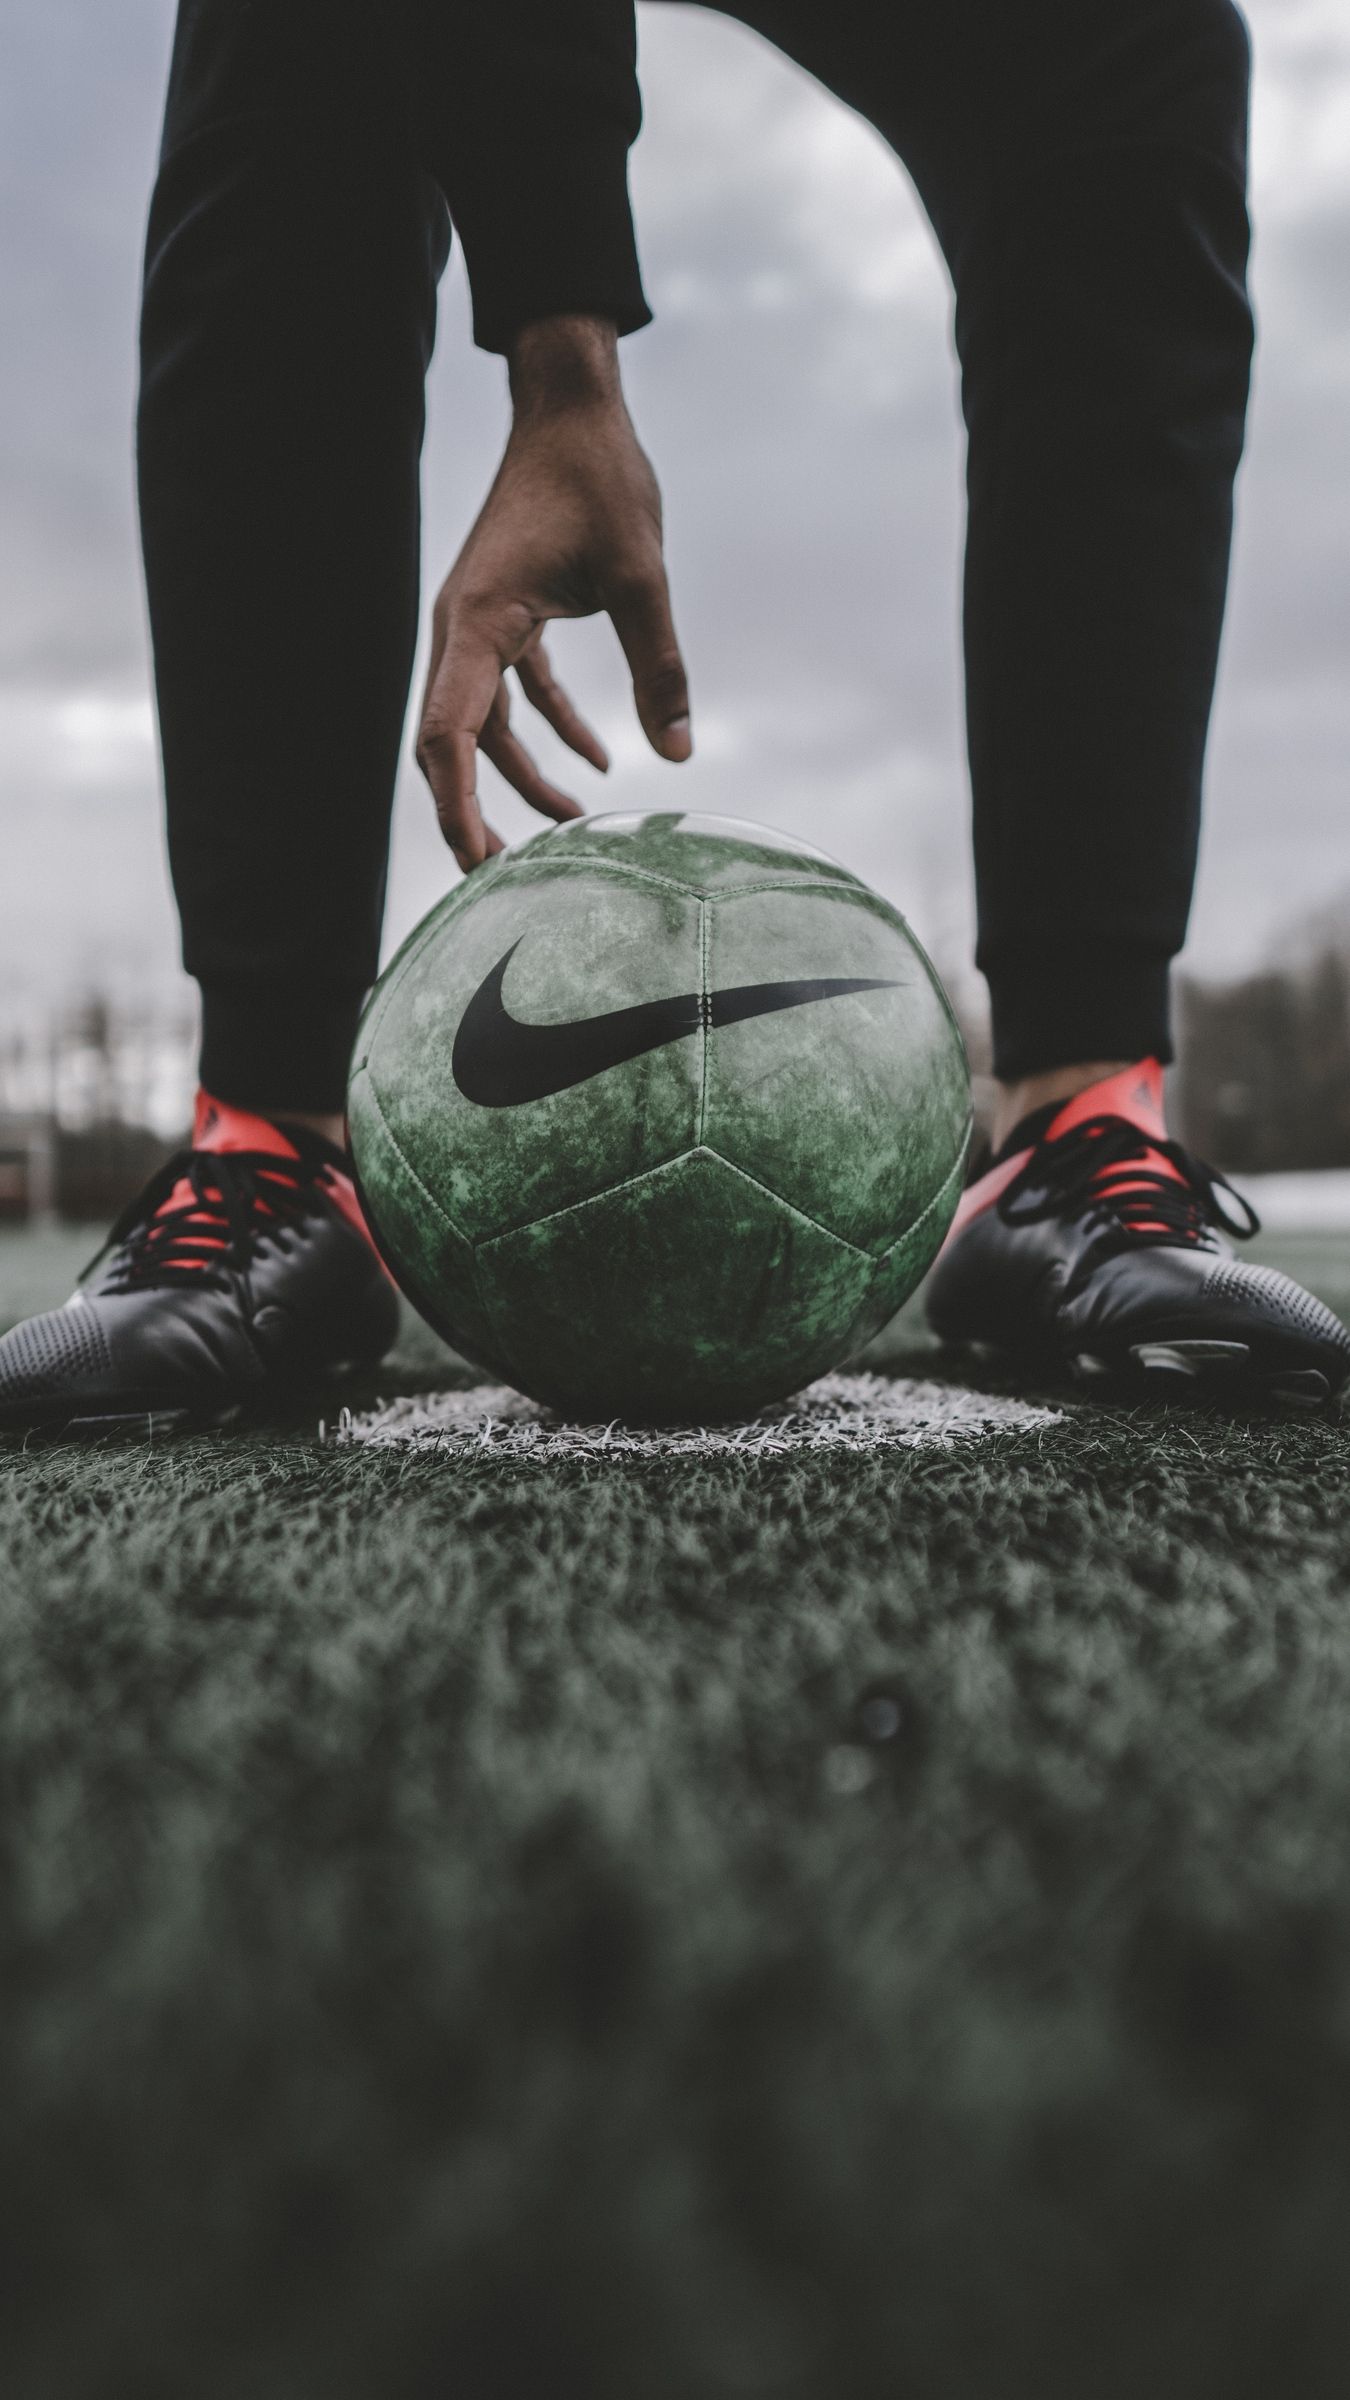 A person wearing black pants and red shoes is about to kick a green soccer ball on a field. - Soccer